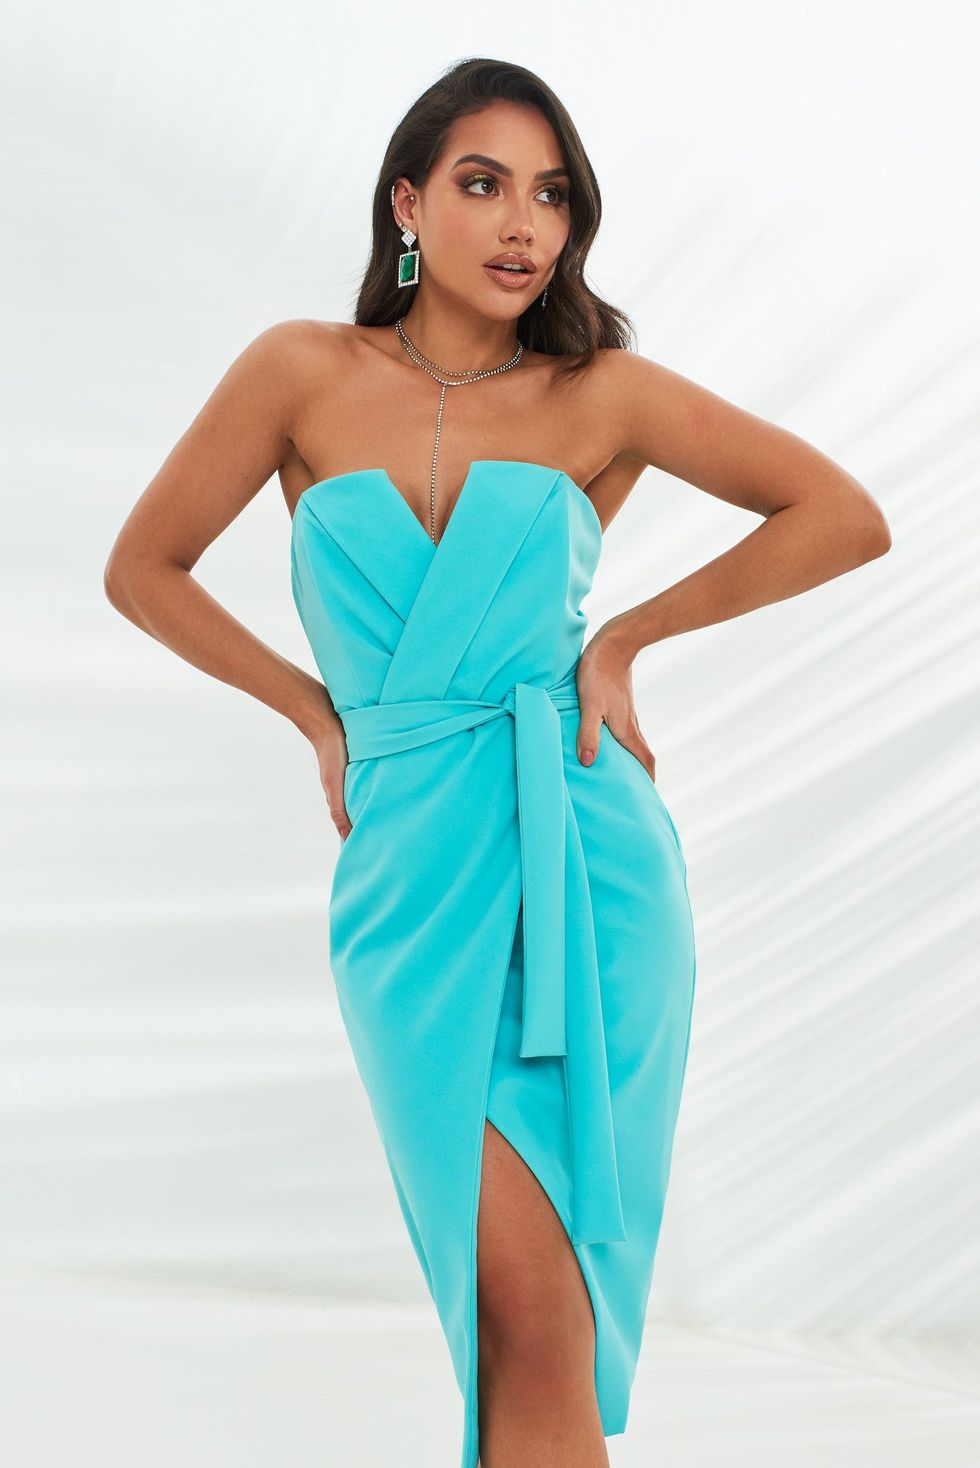 23 Best Homecoming Dresses for 2020